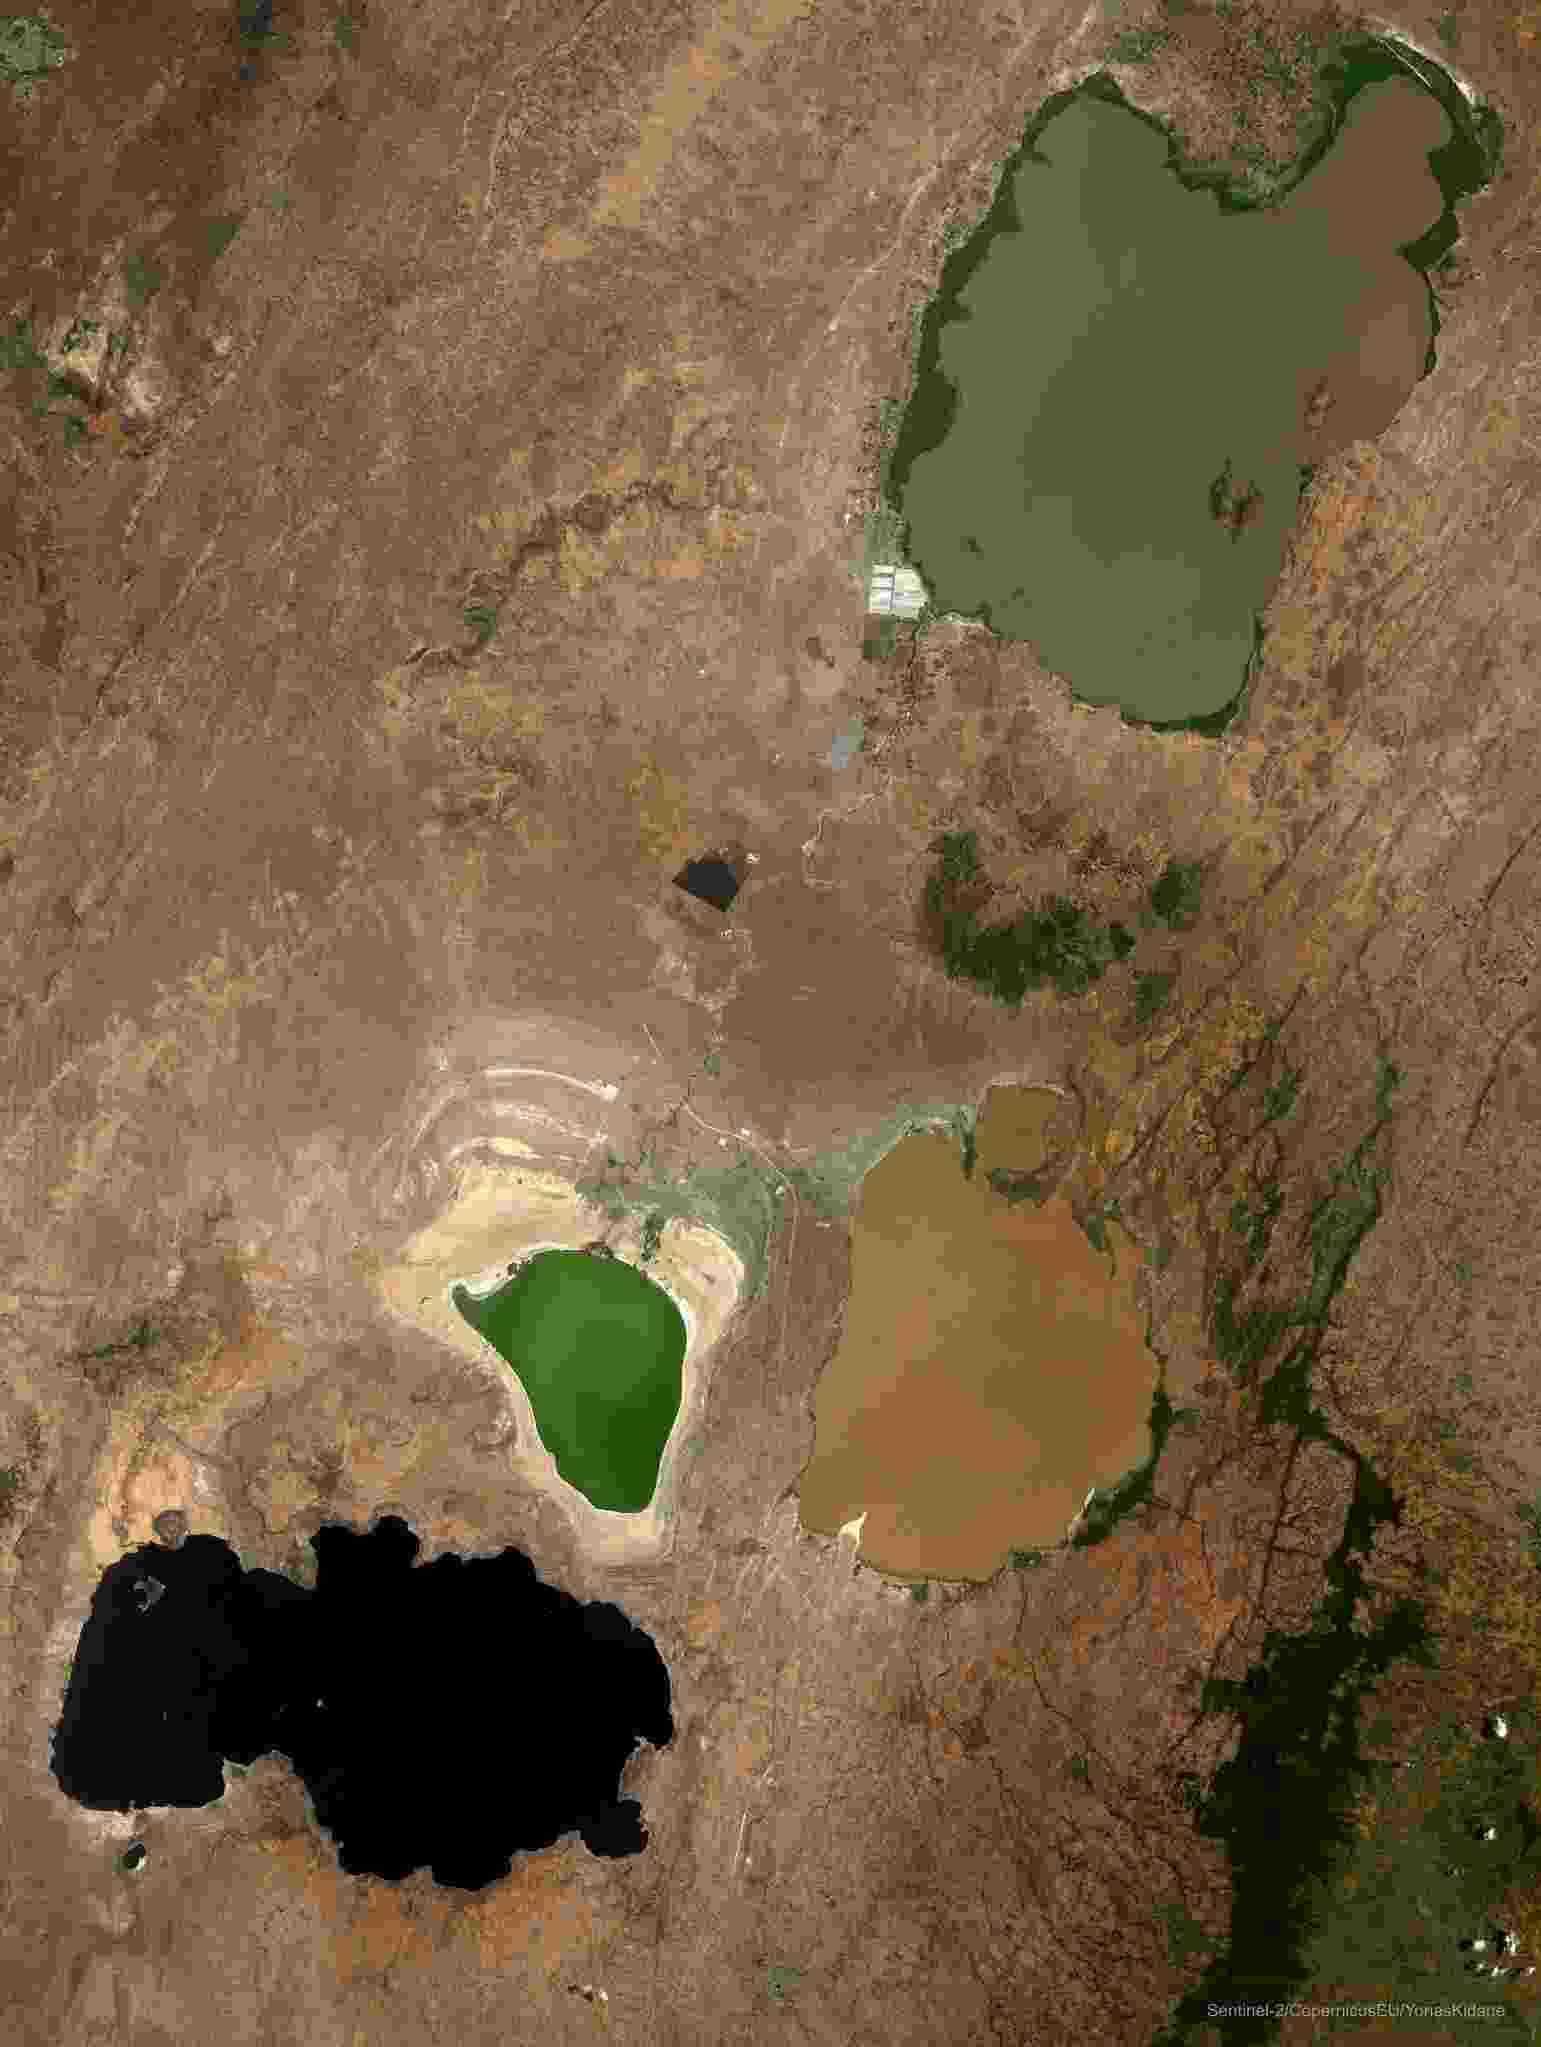 Birdseye view of the lakes of the Central Rift Valley